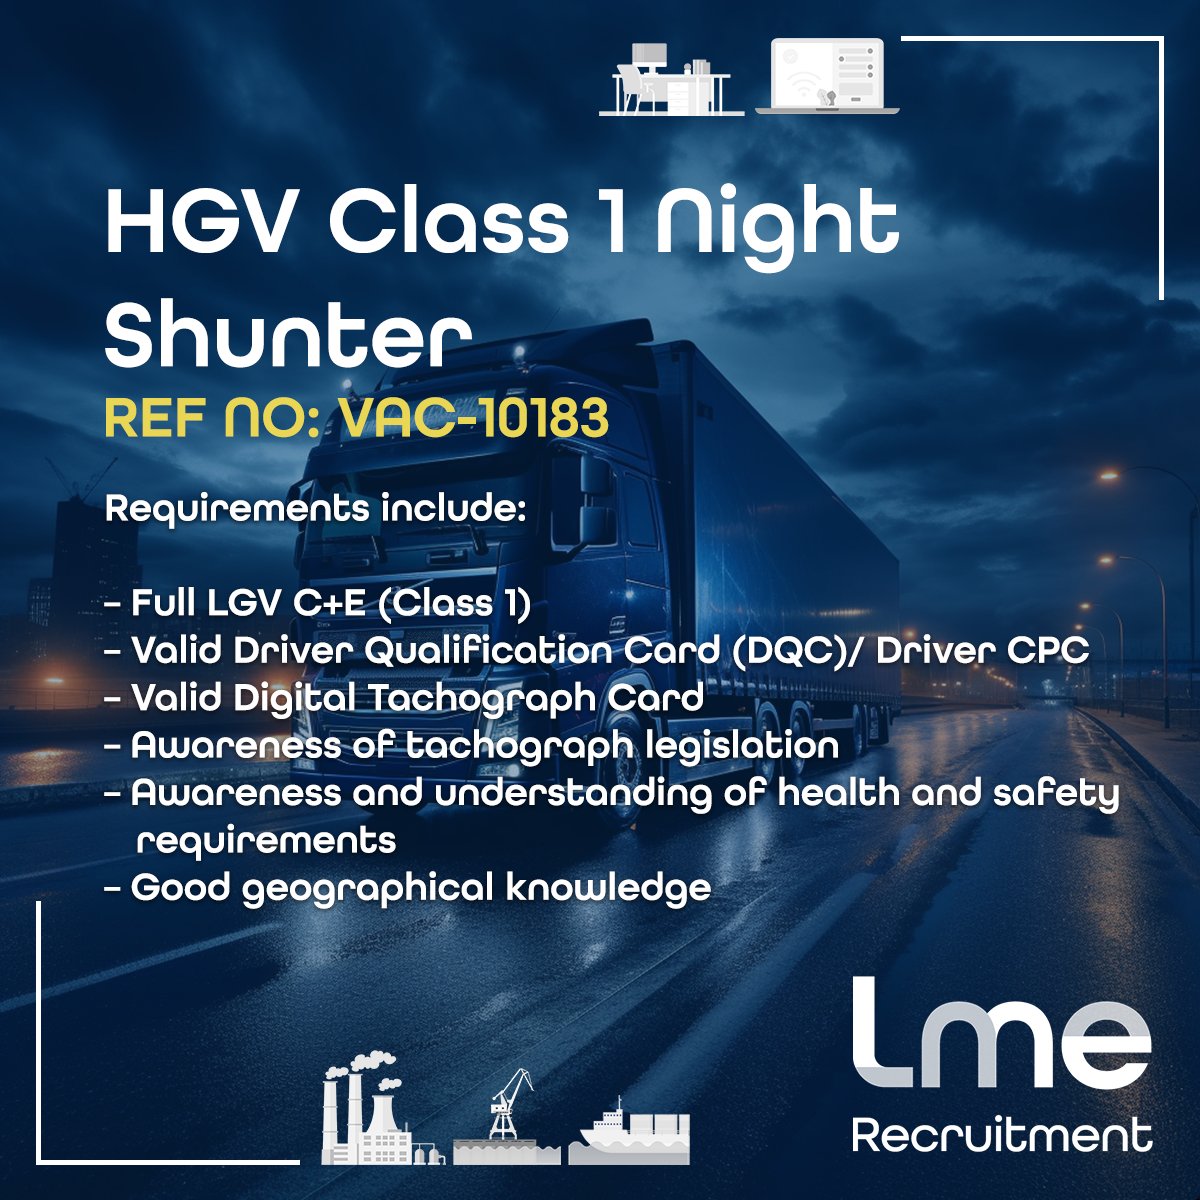 Our client is looking to employ experienced and qualified Class 1 drivers for night shunting roles.

If this looks like the right job for you, apply today at lmerecruitment.co.uk

#hgvdriver #ipswichjobs #jobopportunity #lmerecruitment #driverjobsuk